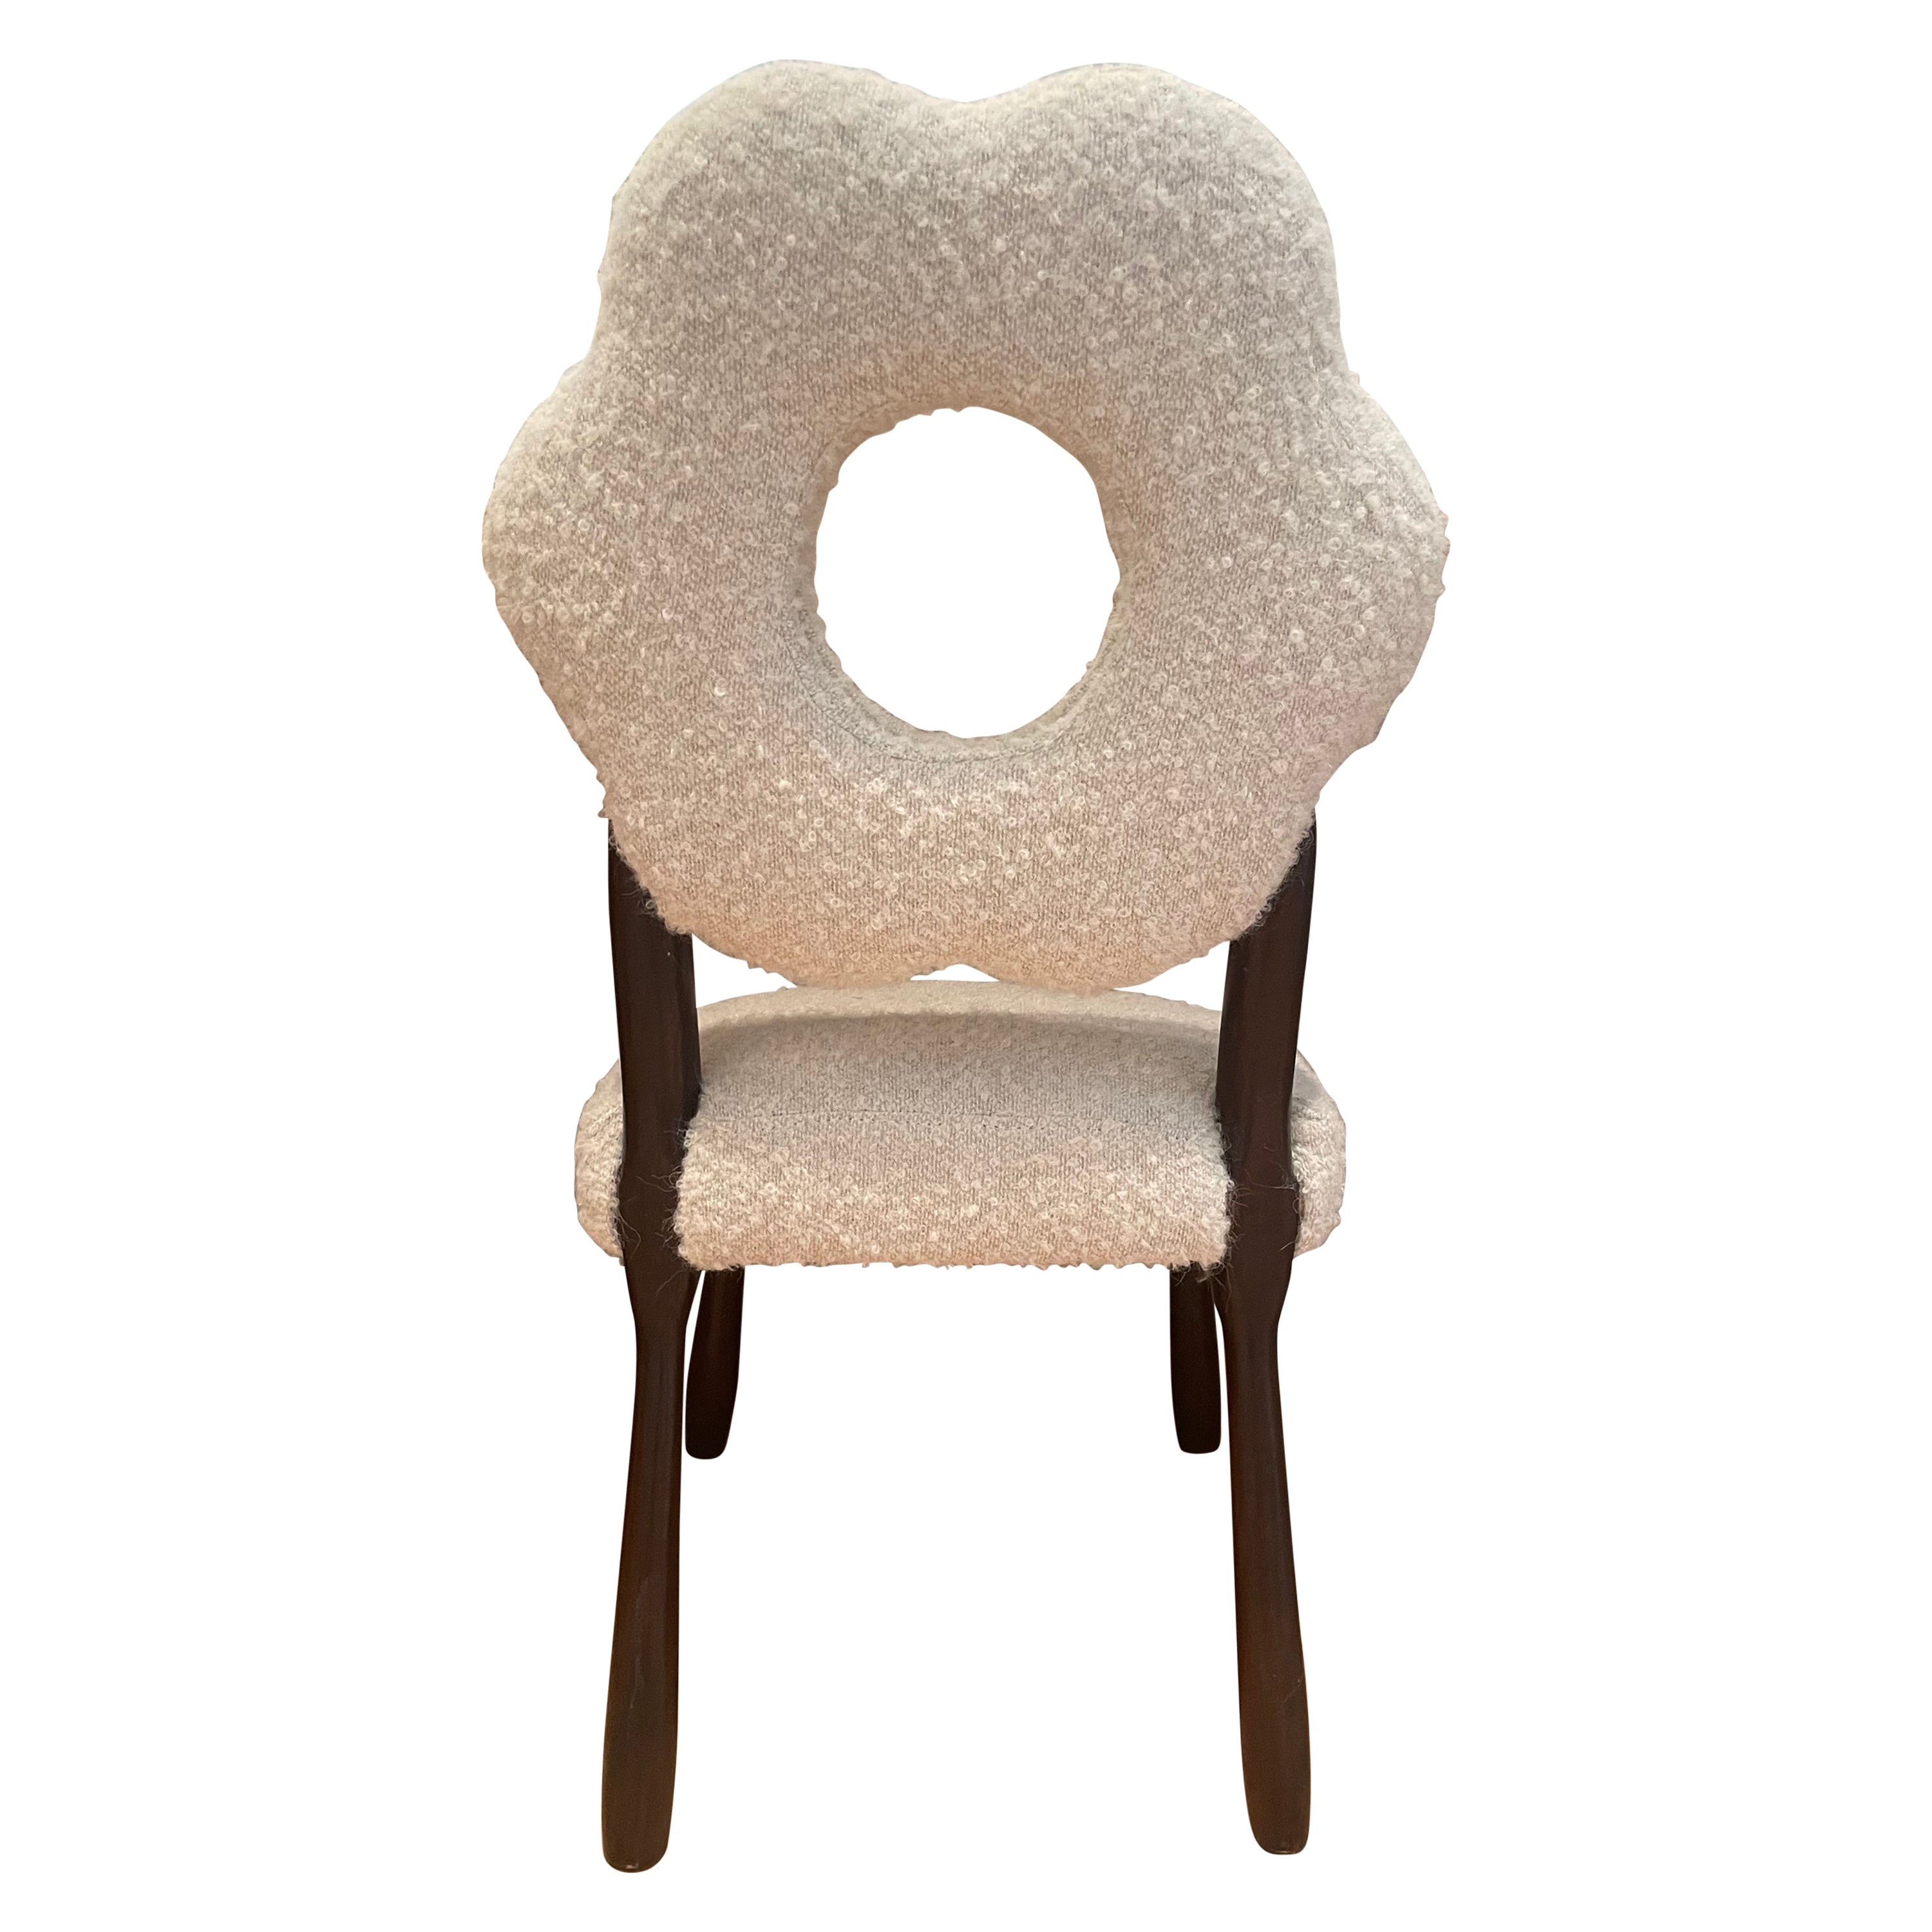 Studio OSKLO 'Flower' Chair in cozy White Boucle  For Sale